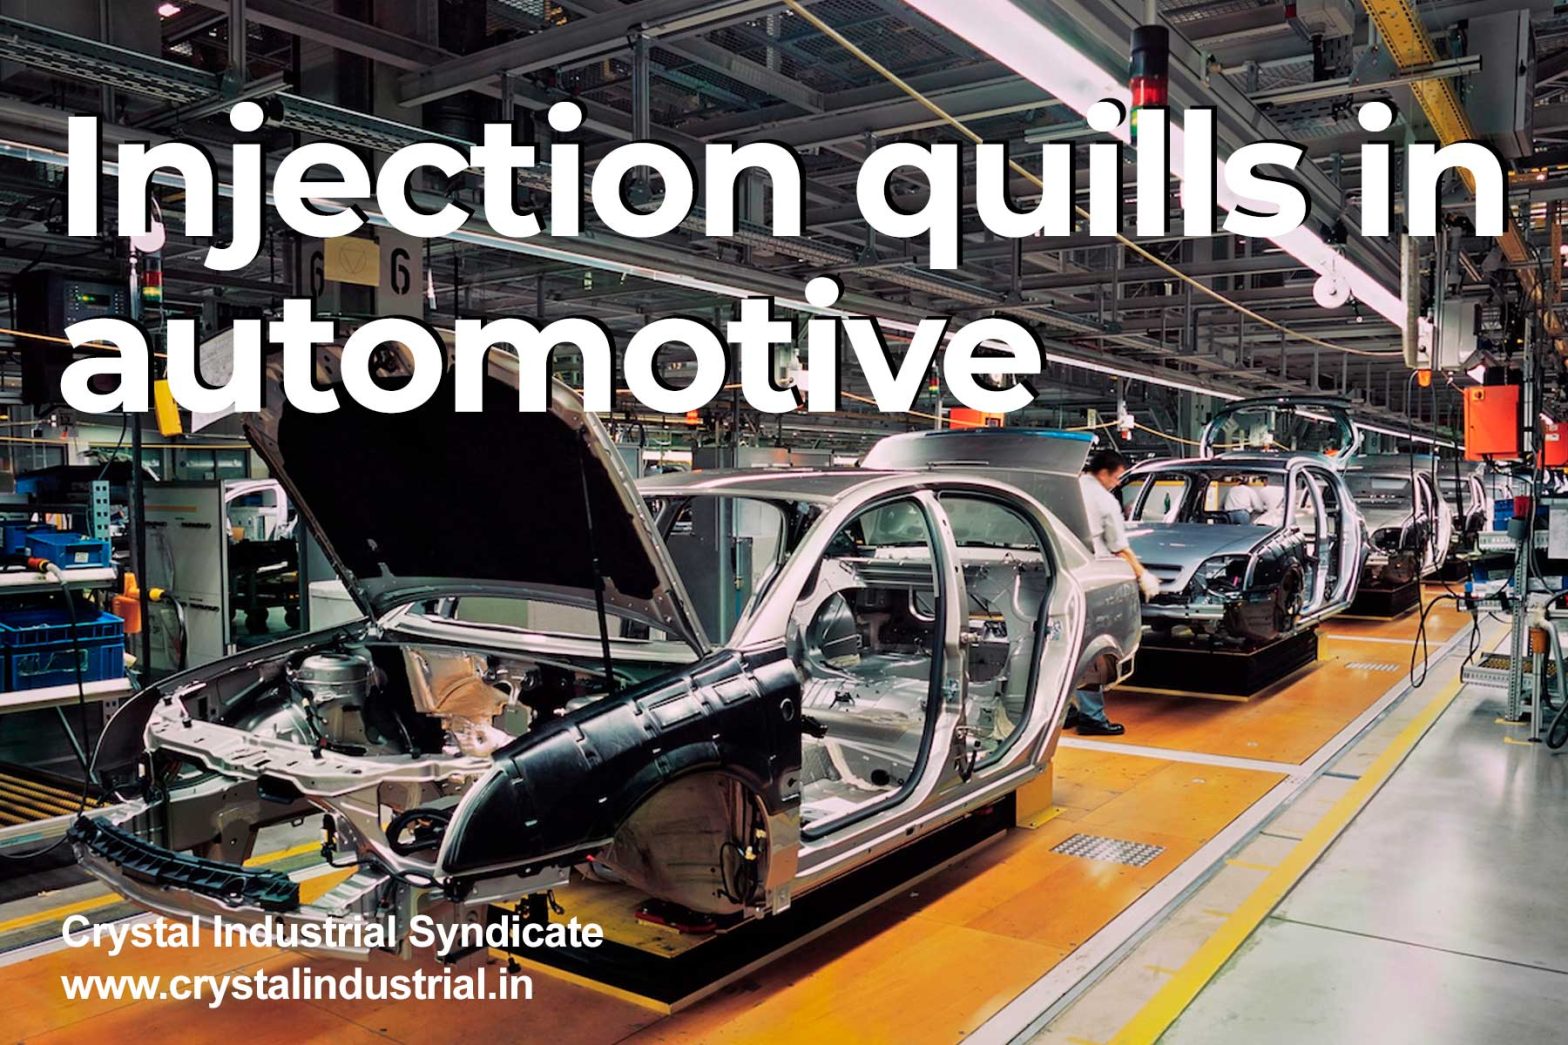 Injection quills manufactured in India, used in automotive industry